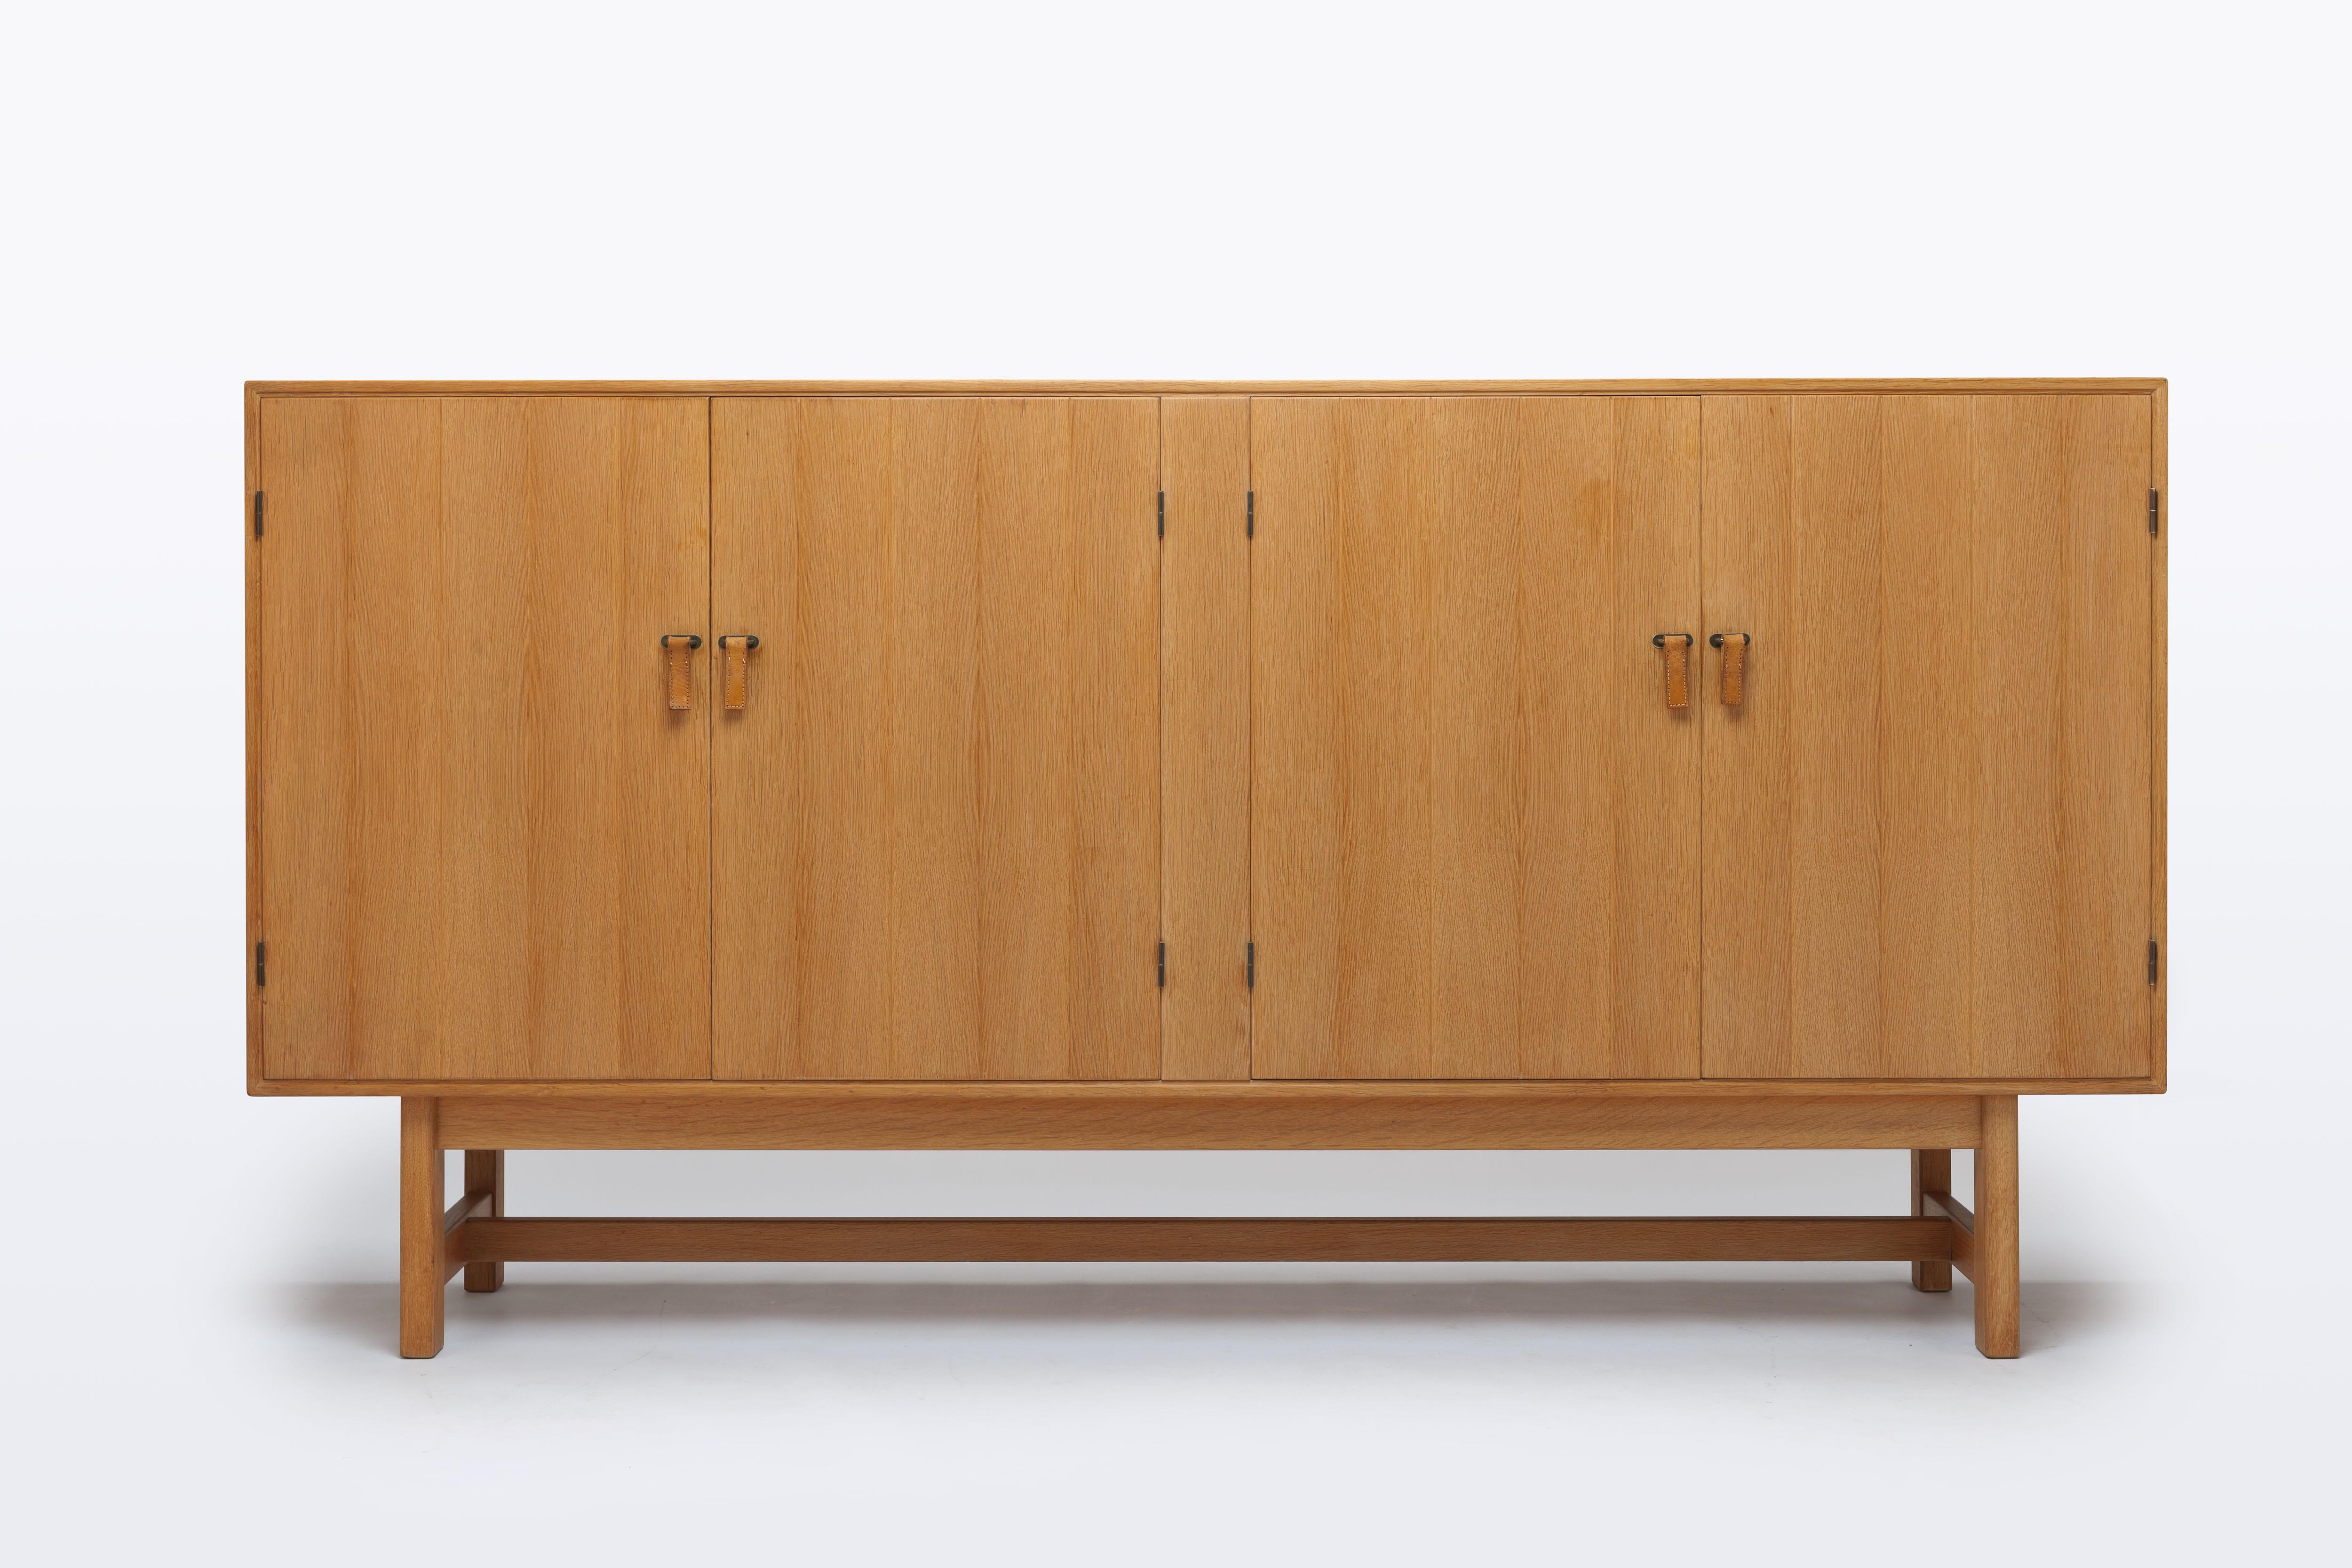 Beautiful minimalistic modern cabinet by Danish designer Kurt Kurt Østervig with paneled doors executed with leather pulls on brass hardware.
The cabinet is divided into four compartments, of which one is executed with typical Danish smaller trays